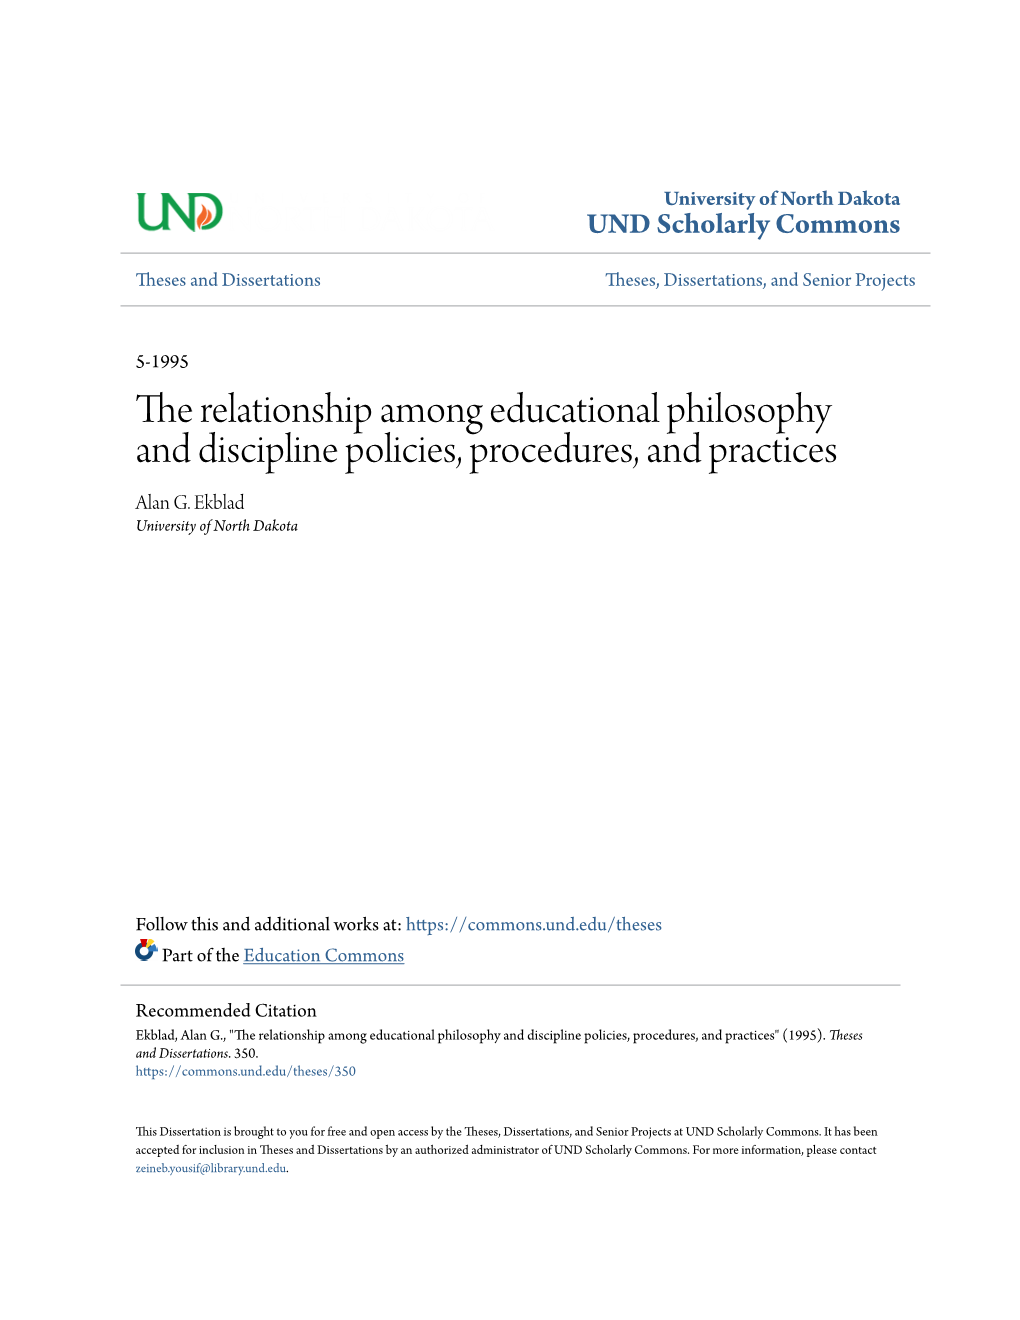 The Relationship Among Educational Philosophy and Discipline Policies, Procedures, and Practices